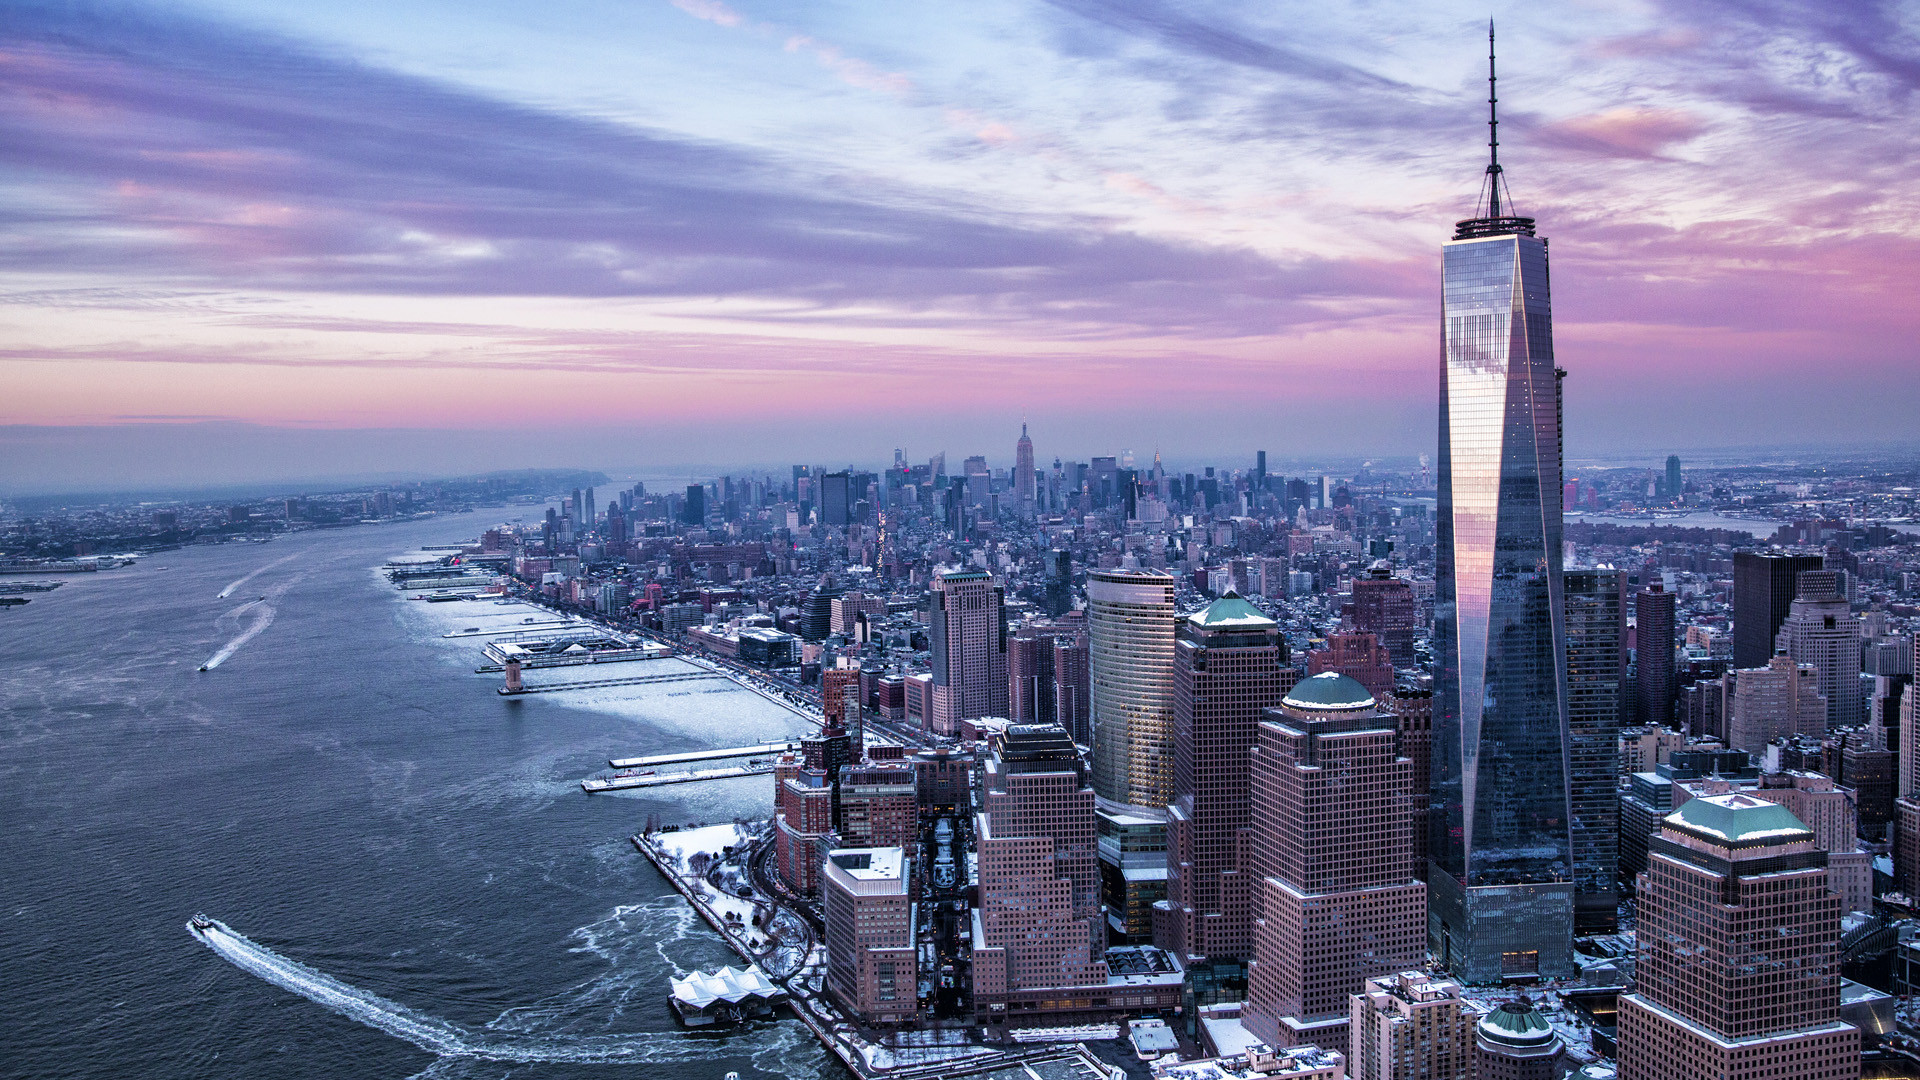 New York Wallpapers and Background Images   stmednet